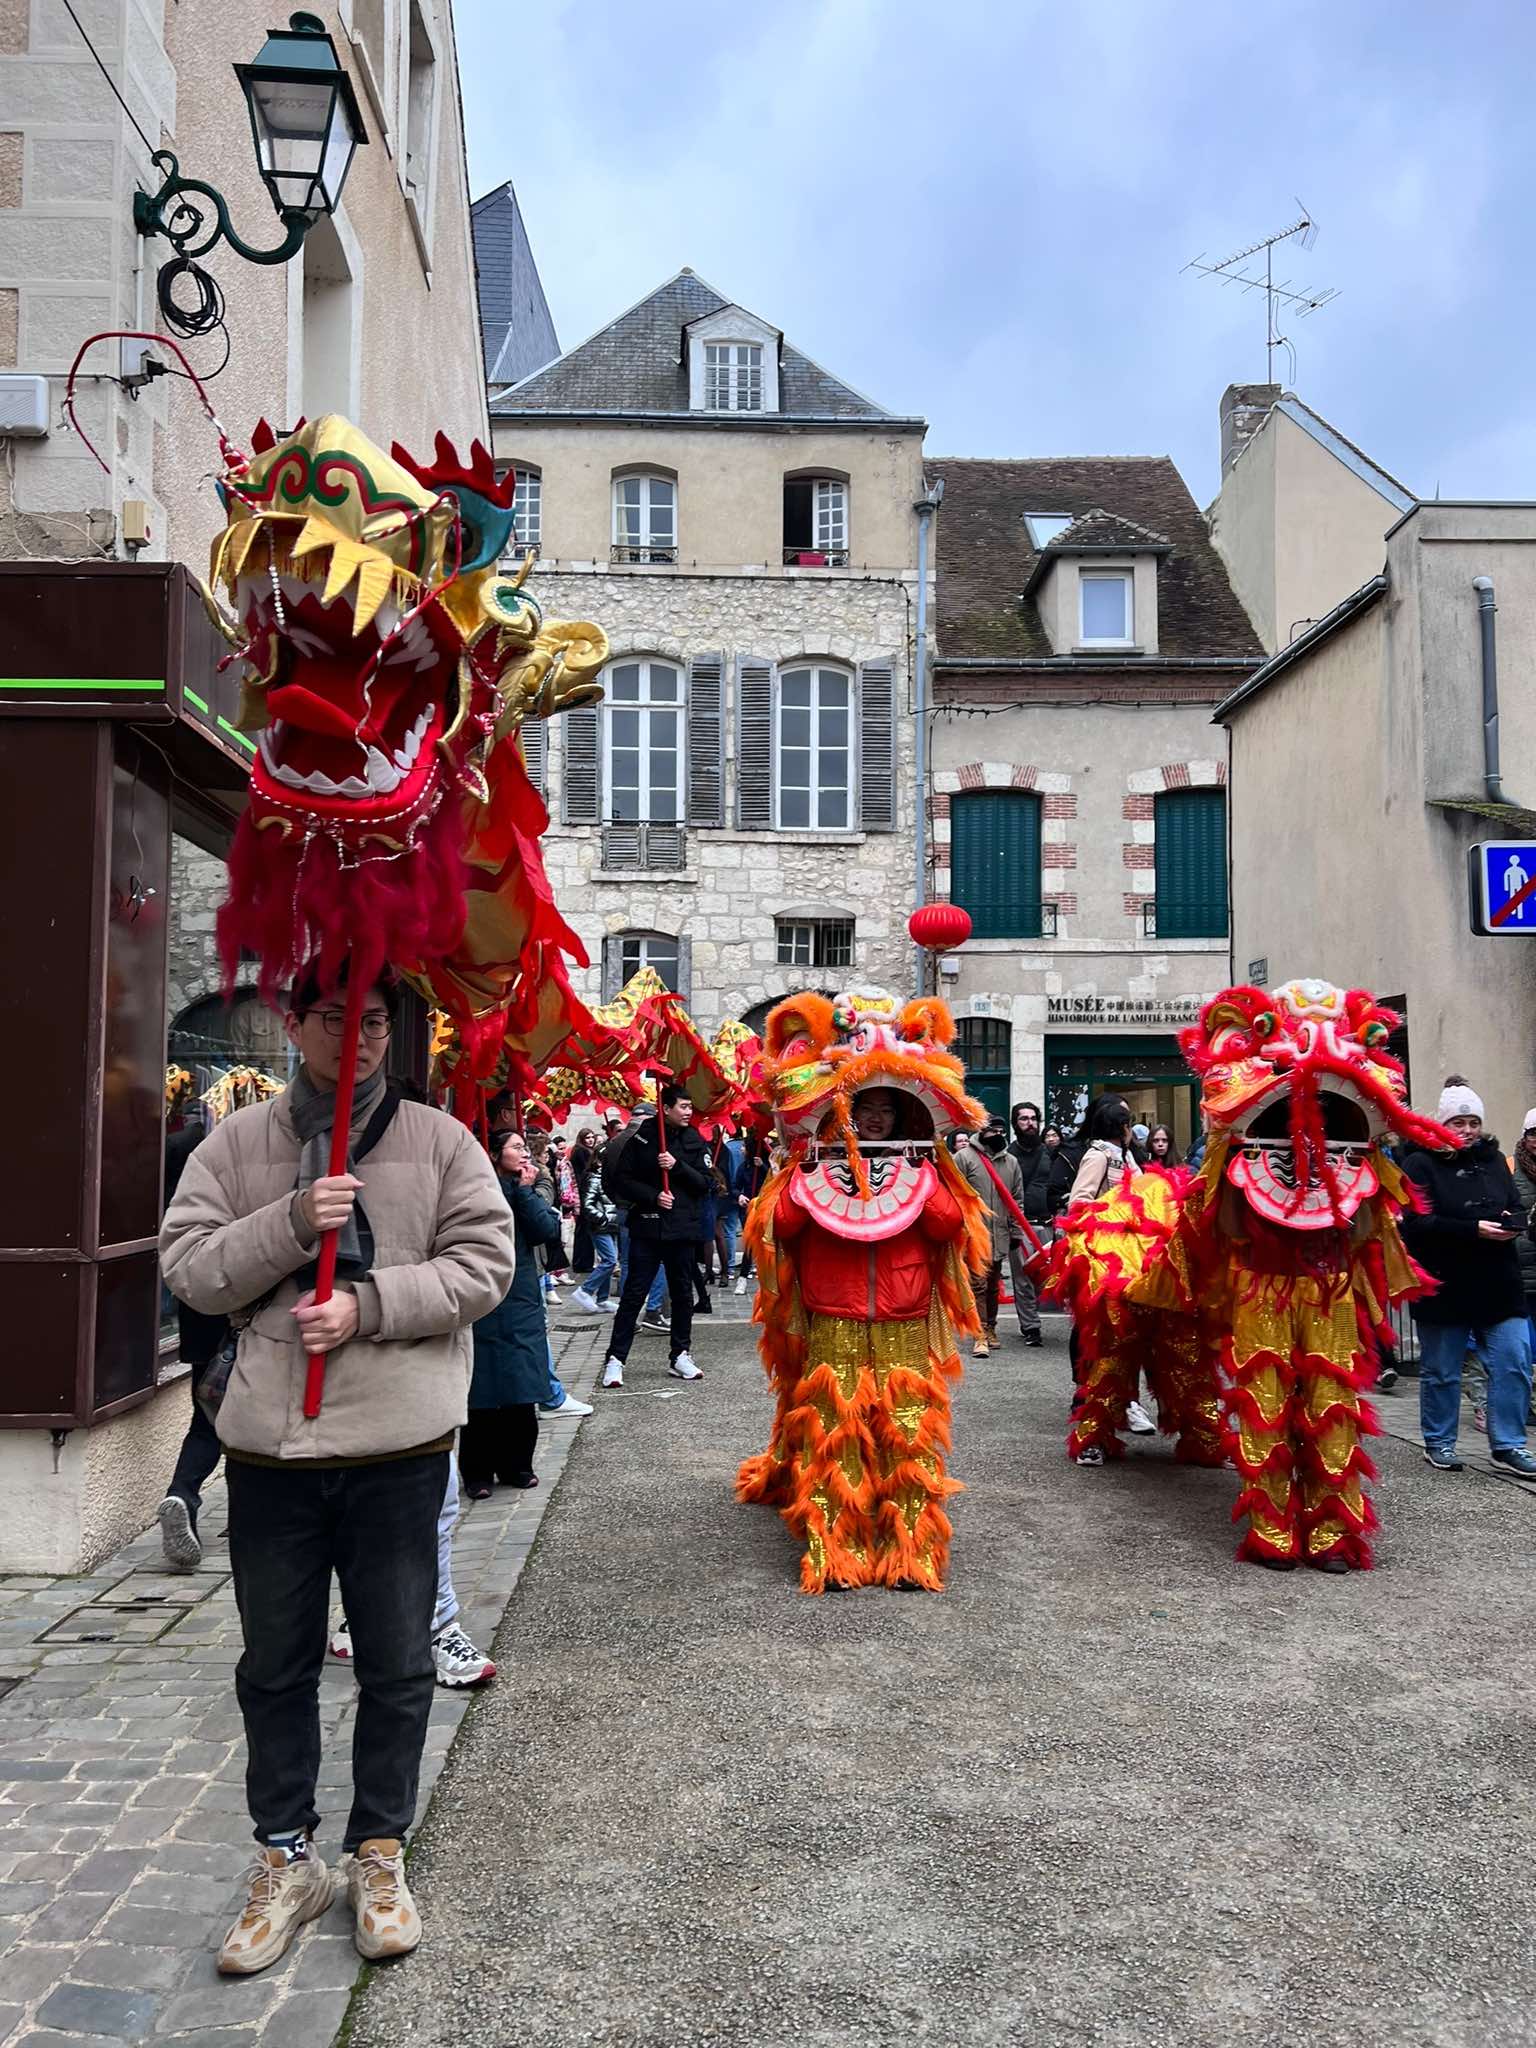 Nouvel an Chinois : Rencontre, conference a Arnay le Duc